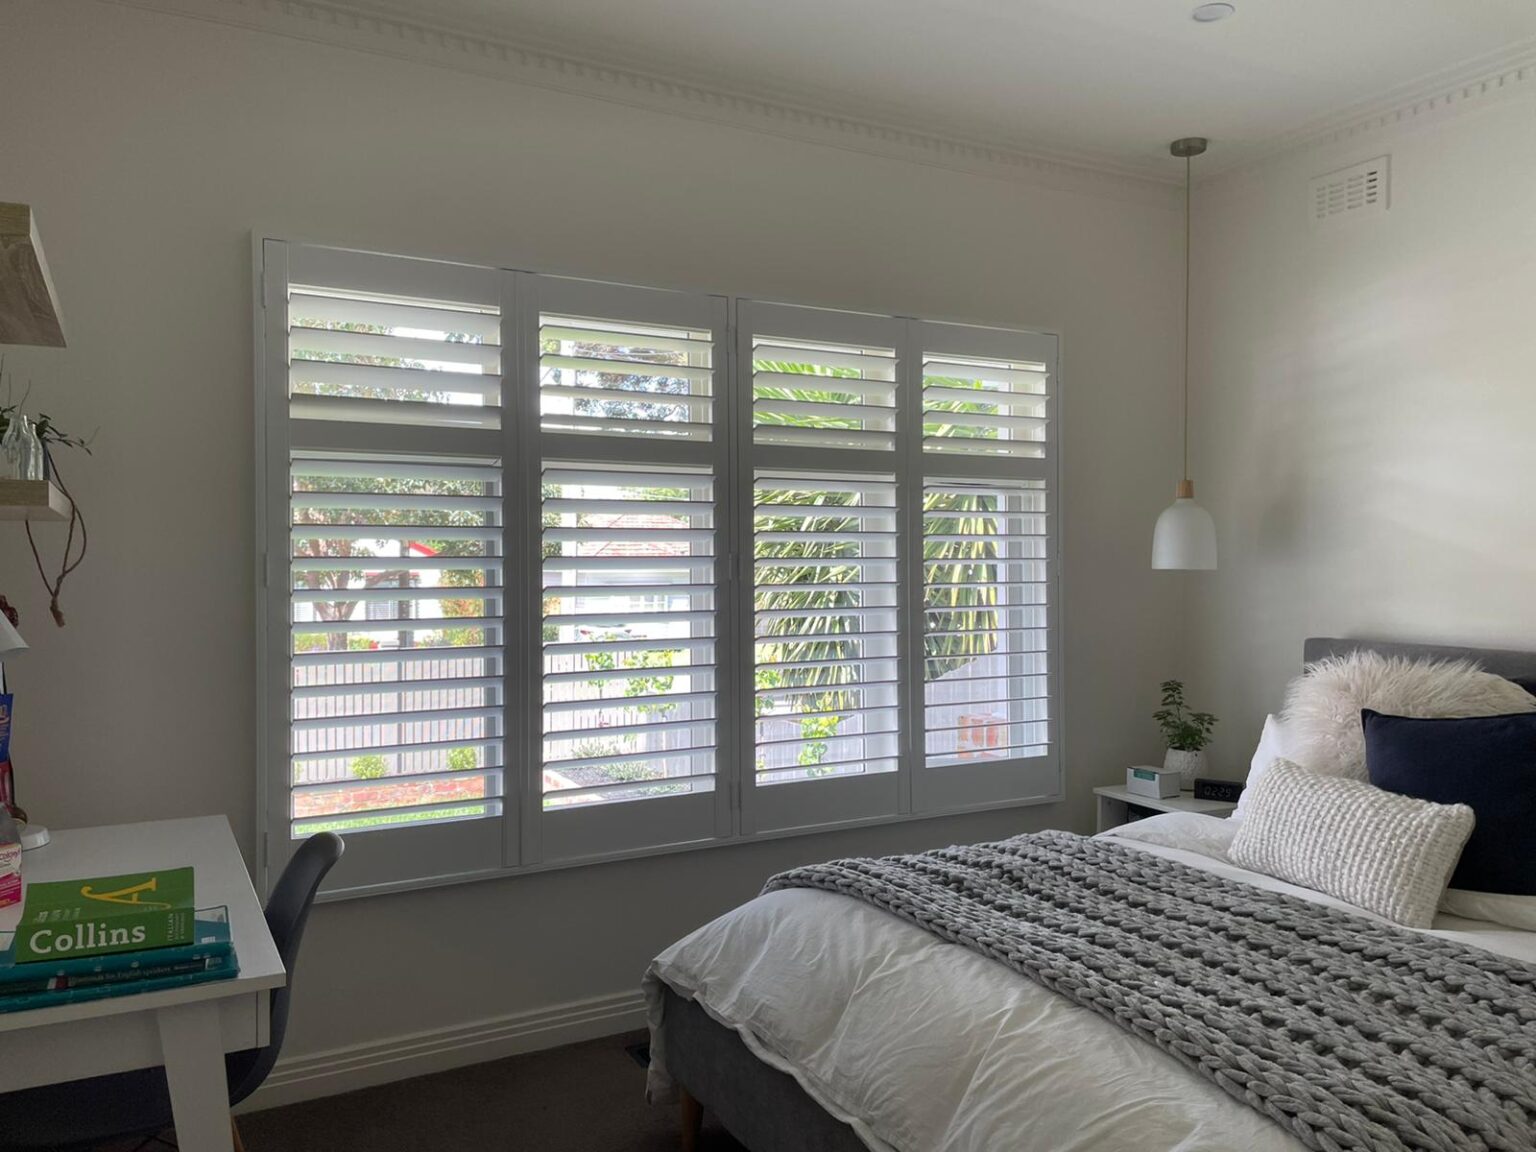 Wood Shutters Supply & Install At Reservoir